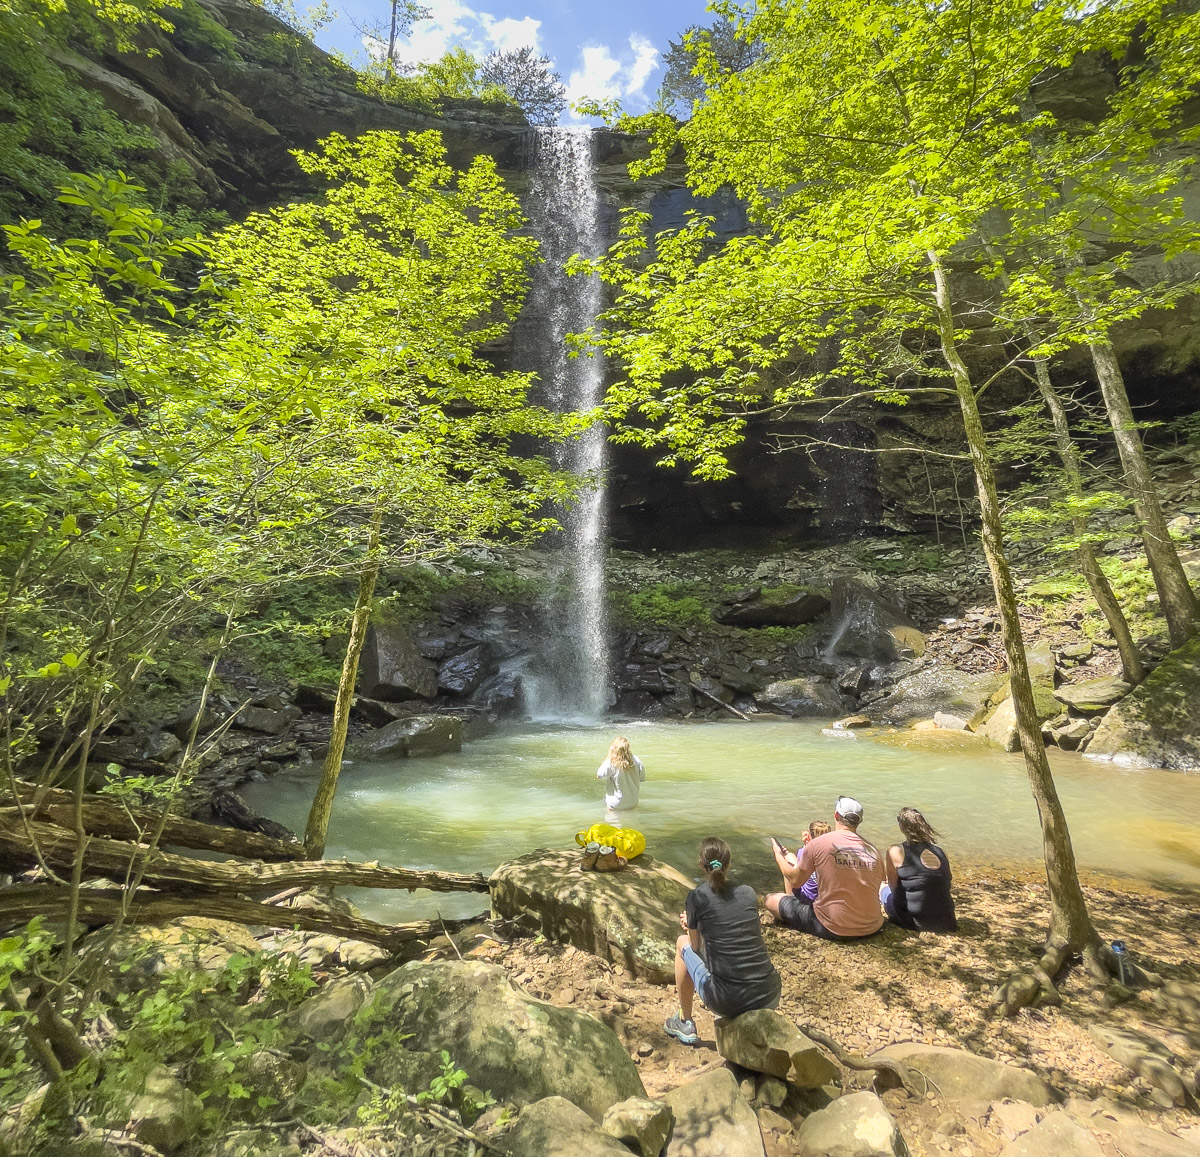 A group of people sit on rocks, staring at a waterfall